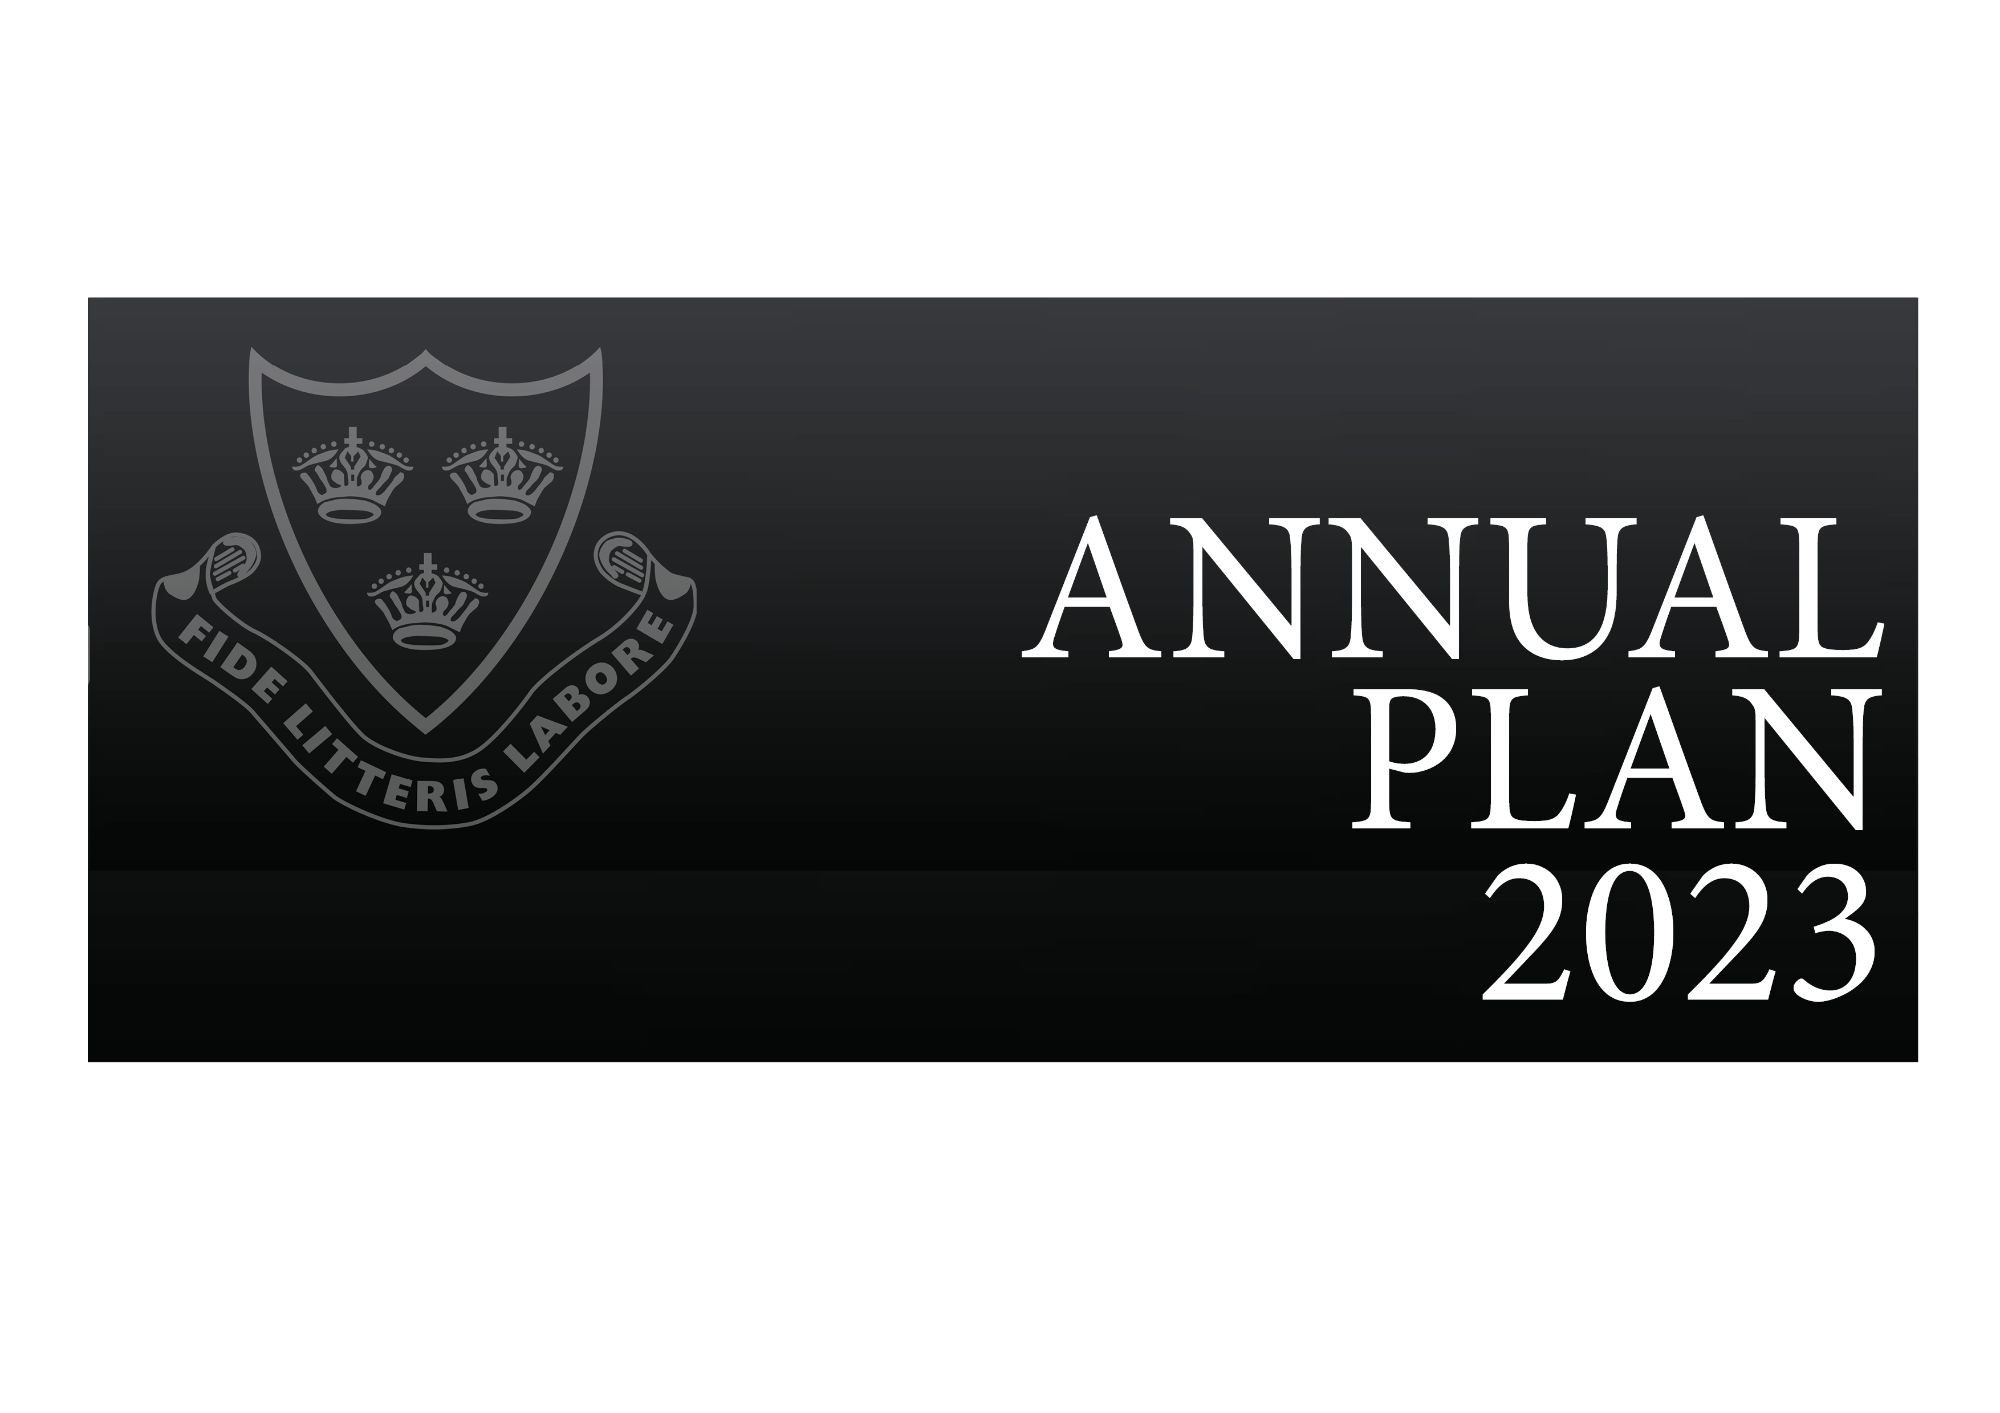 Annual Plan Heading With Crest